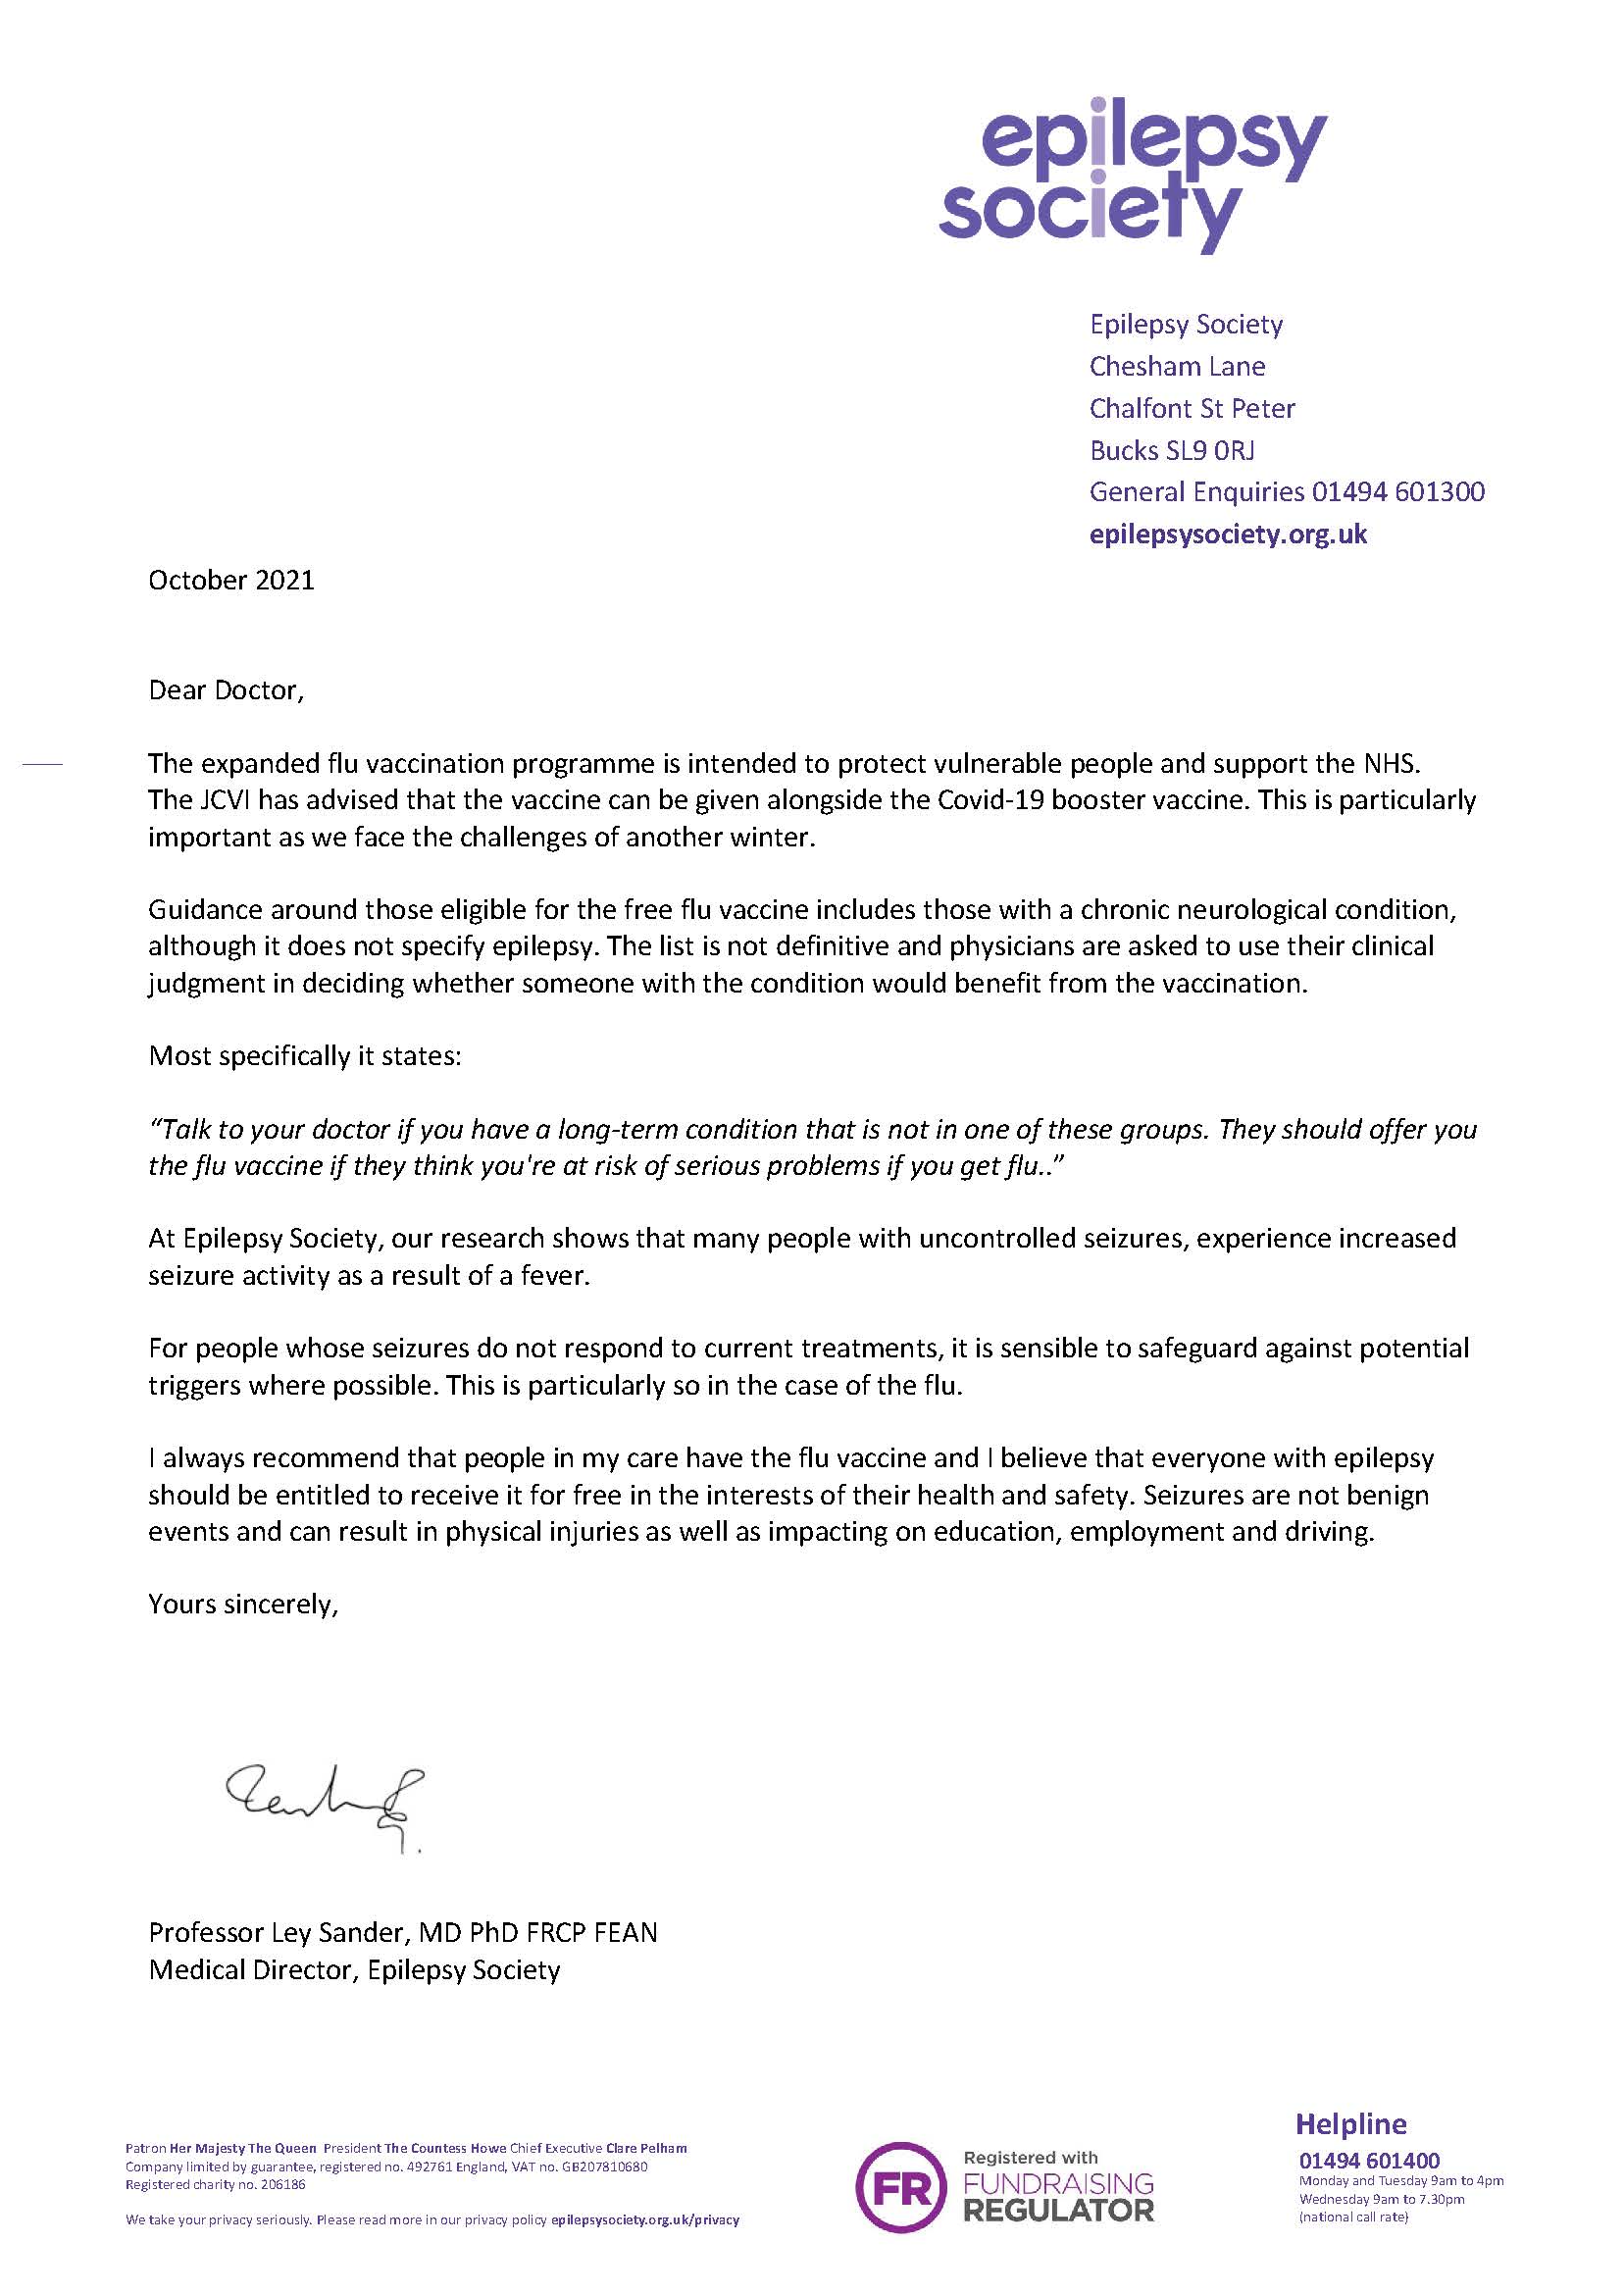 Letter of support from Ley Sander for people with epilepsy to take to their GP